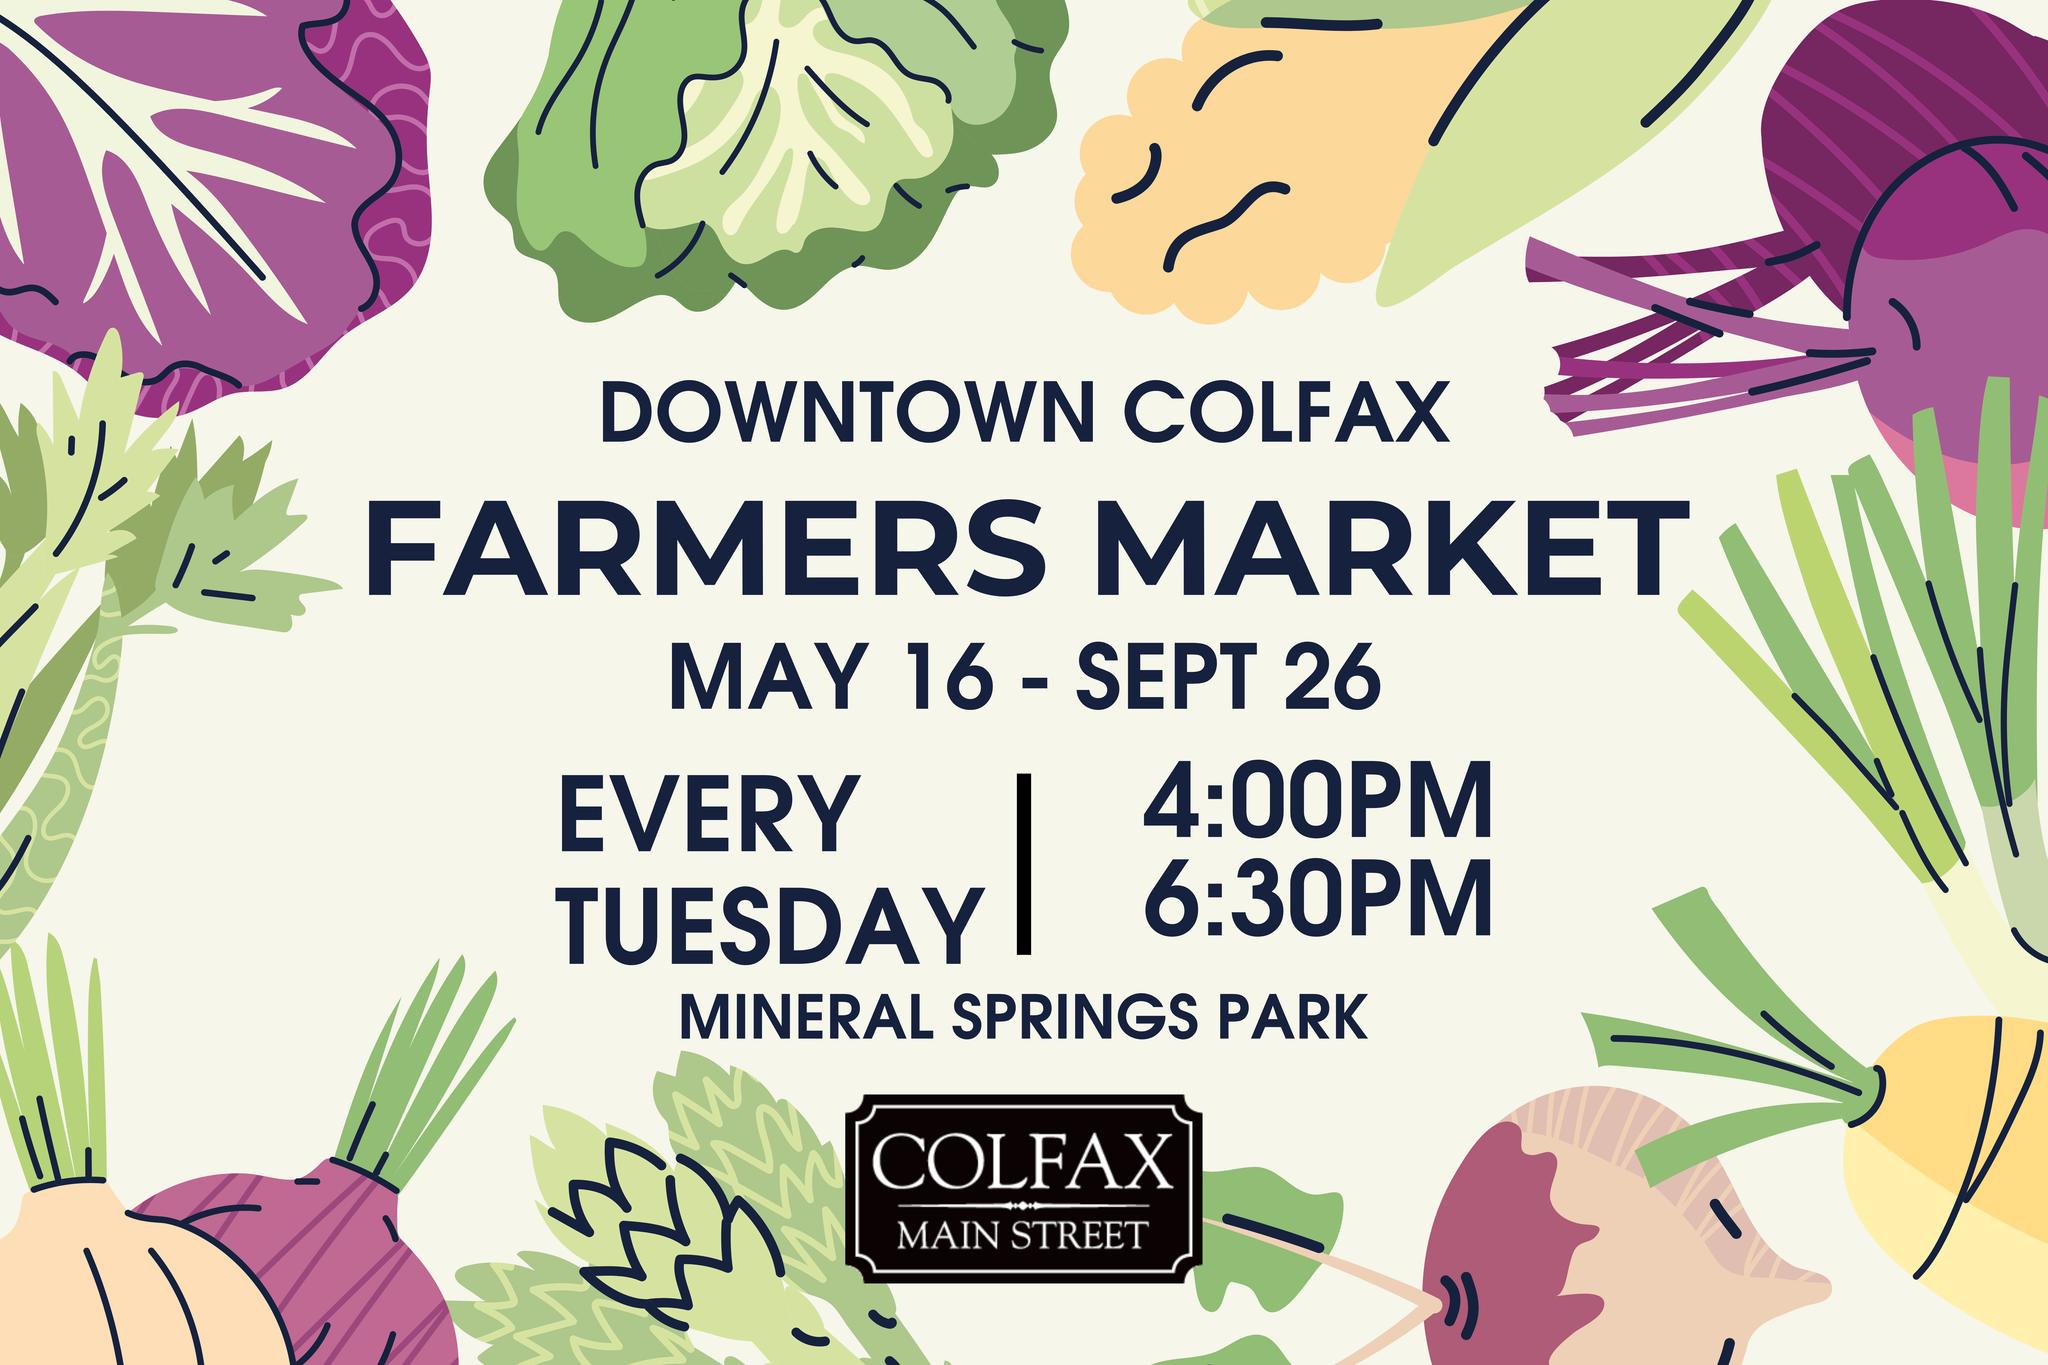 Event Promo Photo For Downtown Colfax Farmers Market